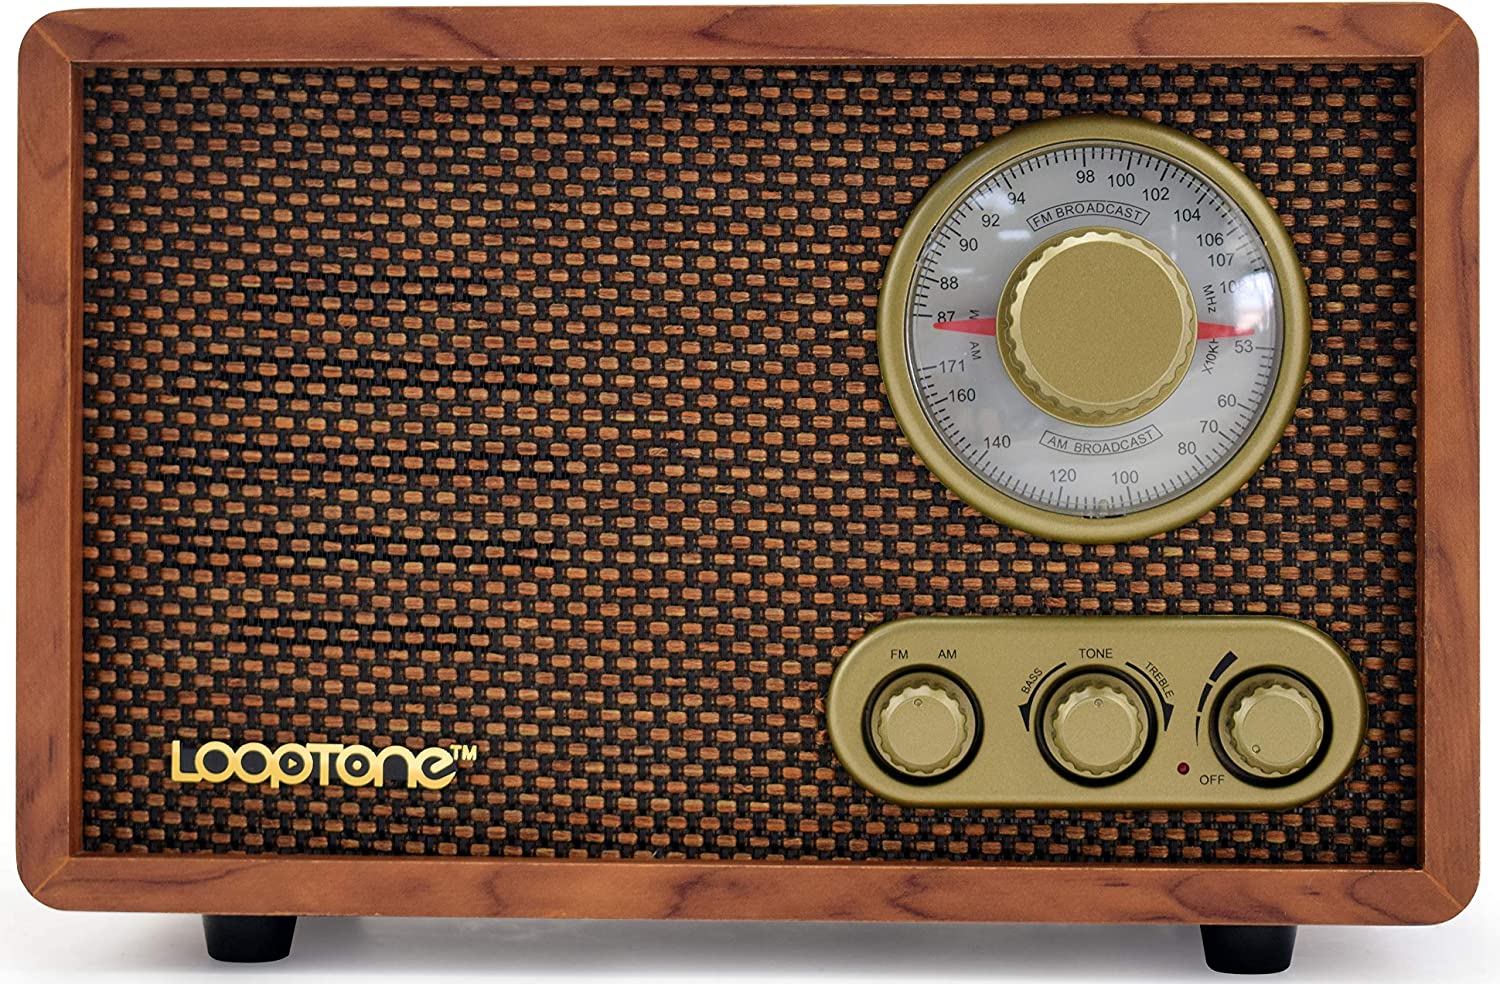 LoopTone AM FM Classic Retro Radio with Bluetooth Speaker,Vintage Wood Table Radio with Treble Bass Control for Kitchen Living Room with Rotary Knob